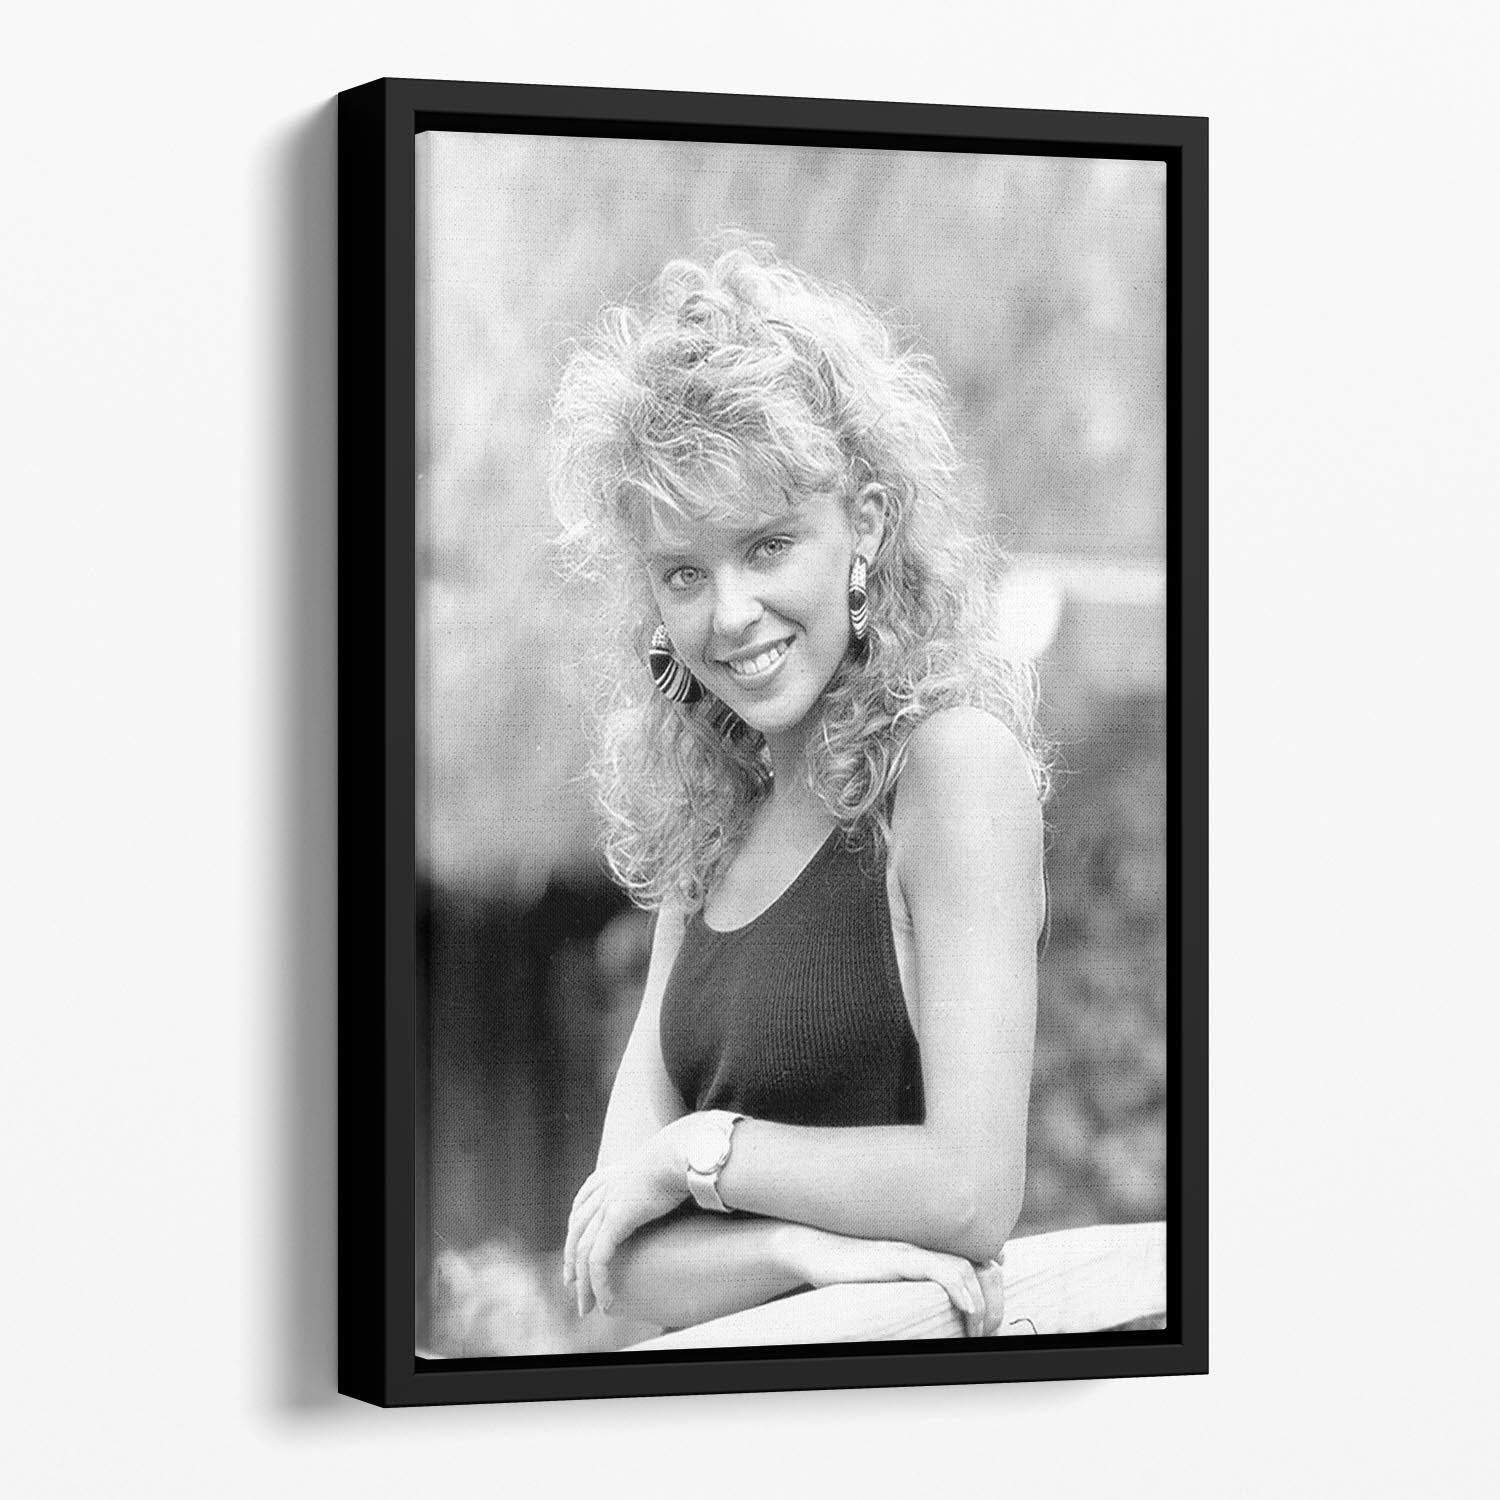 Kylie Minogue in 1988 Floating Framed Canvas - Canvas Art Rocks - 1